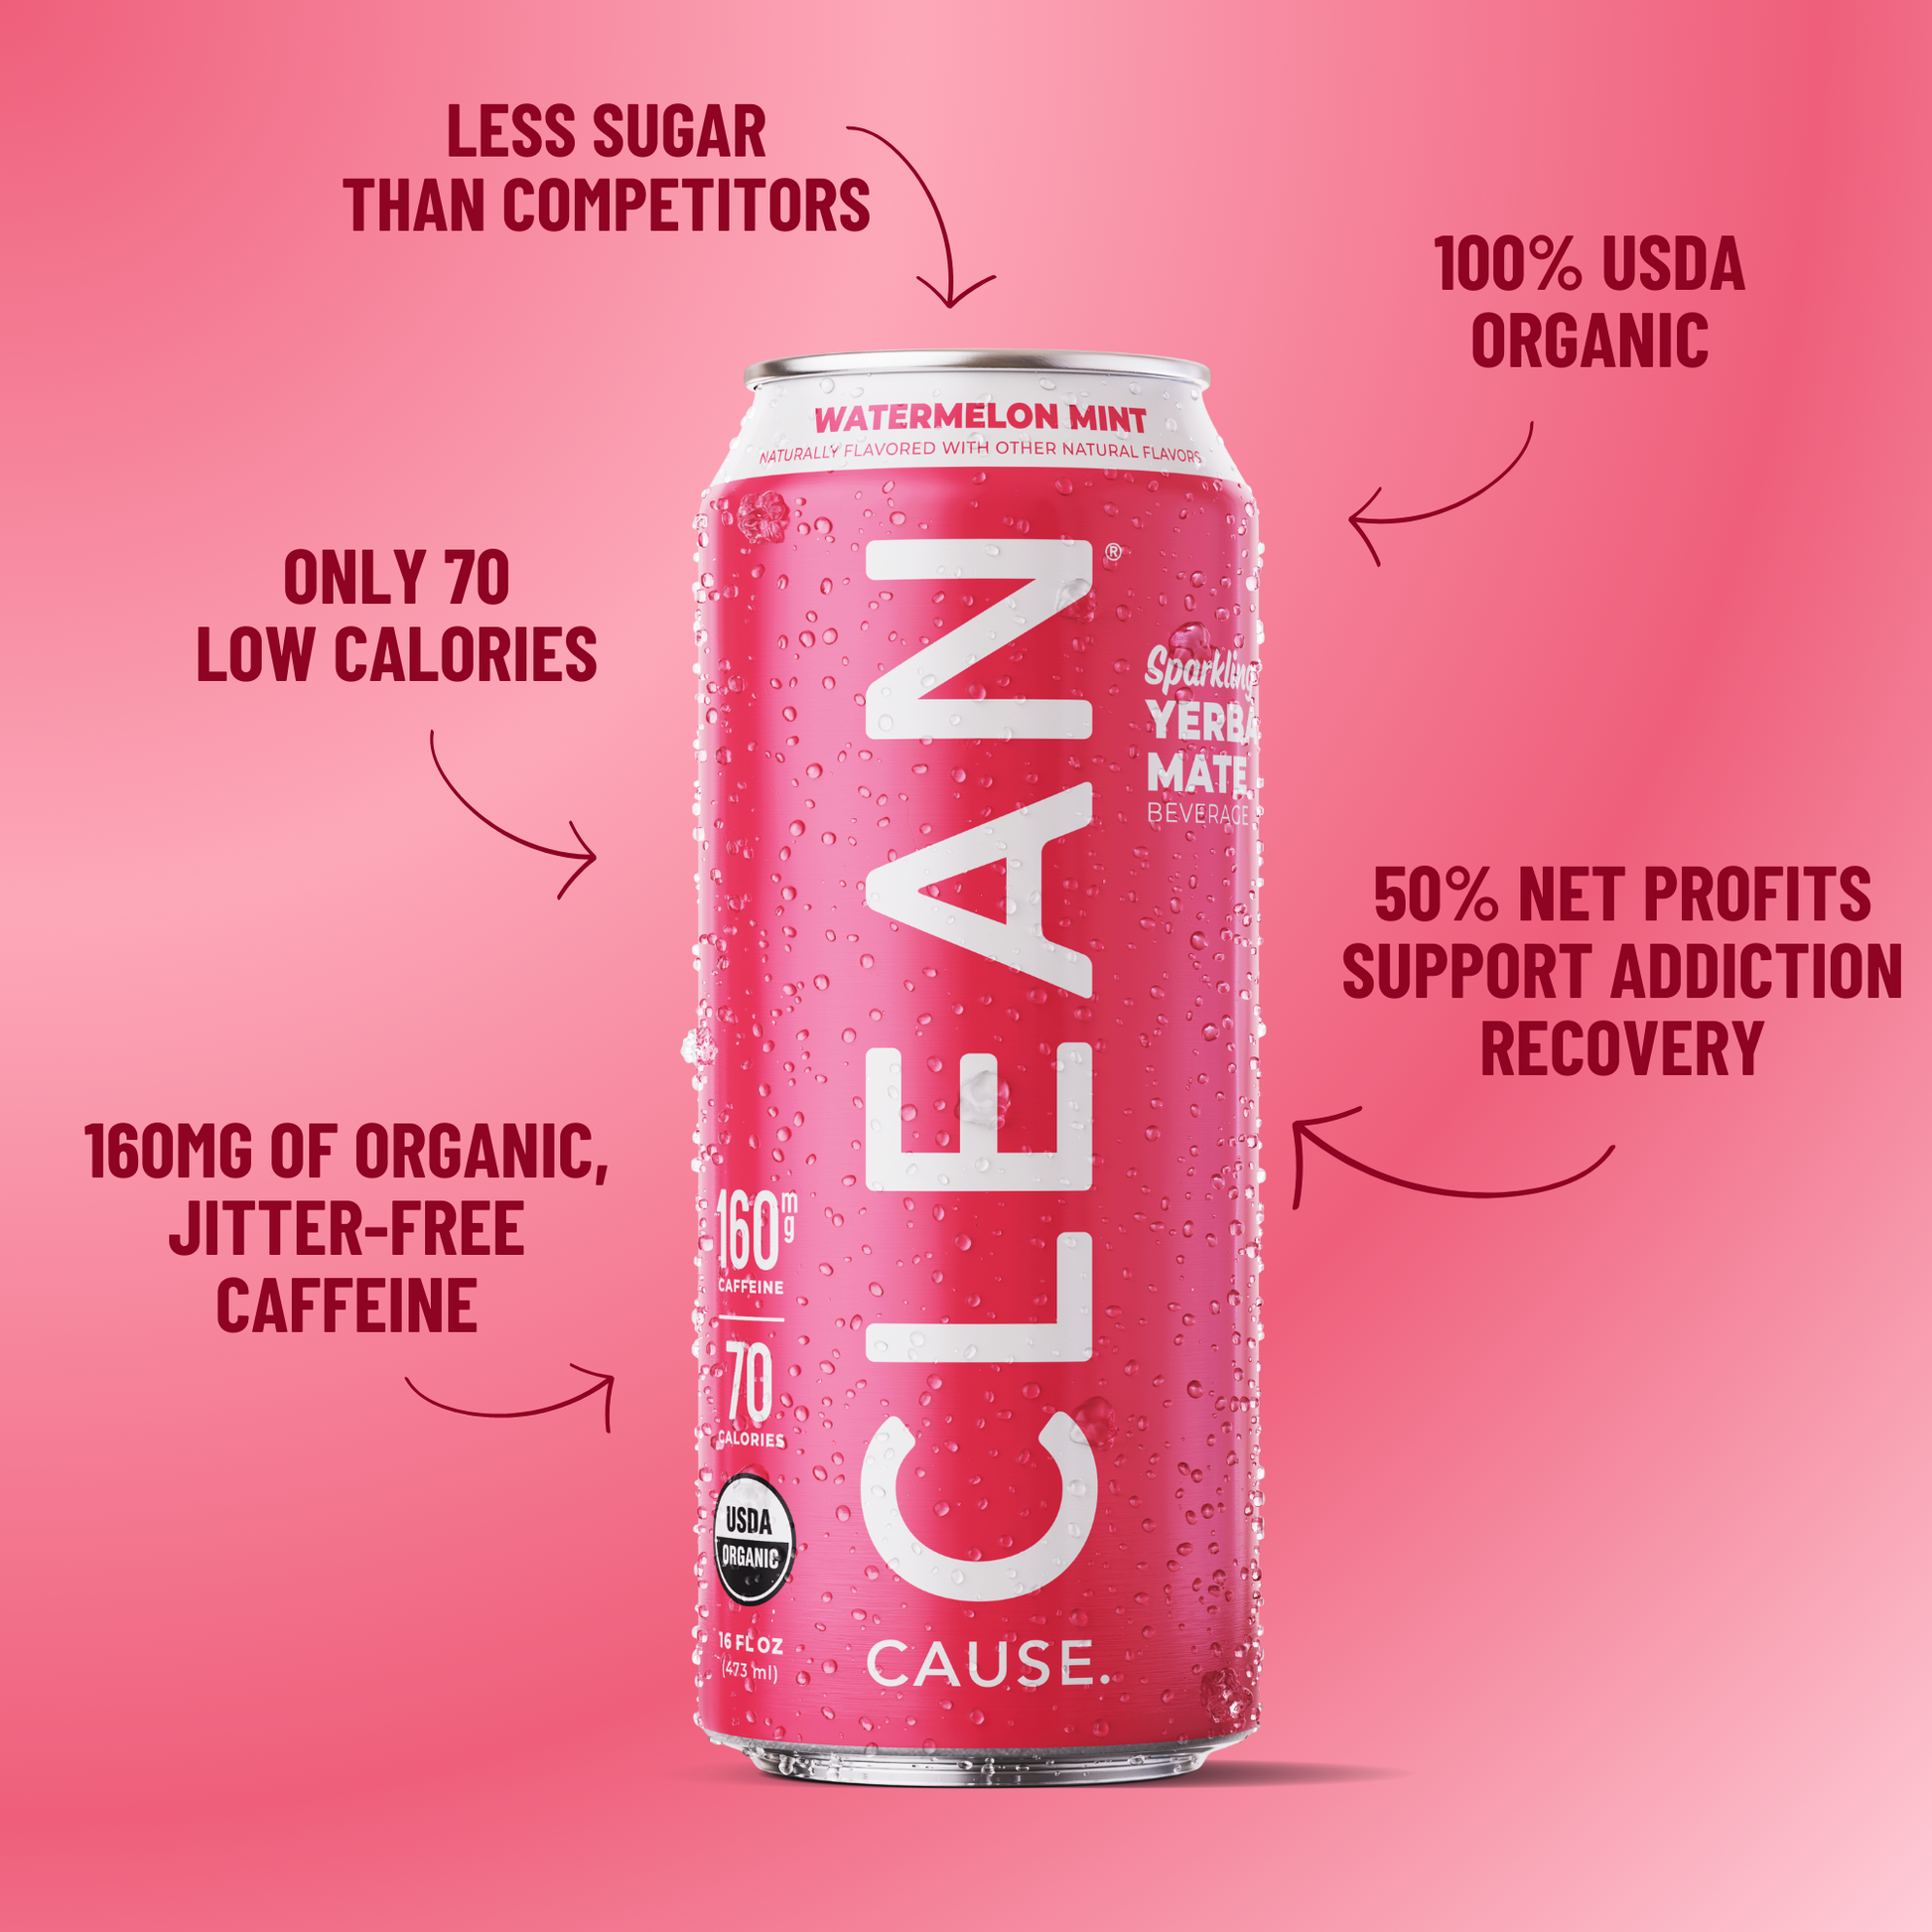 A can of CLEAN Cause Watermelon Mint Yerba Mate with little attributes circling it: 160mg of organic jitter-free caffeine, only 70 calories, less sugar than competitors, 100% USDA organic, 50% net profits support addiction recovery